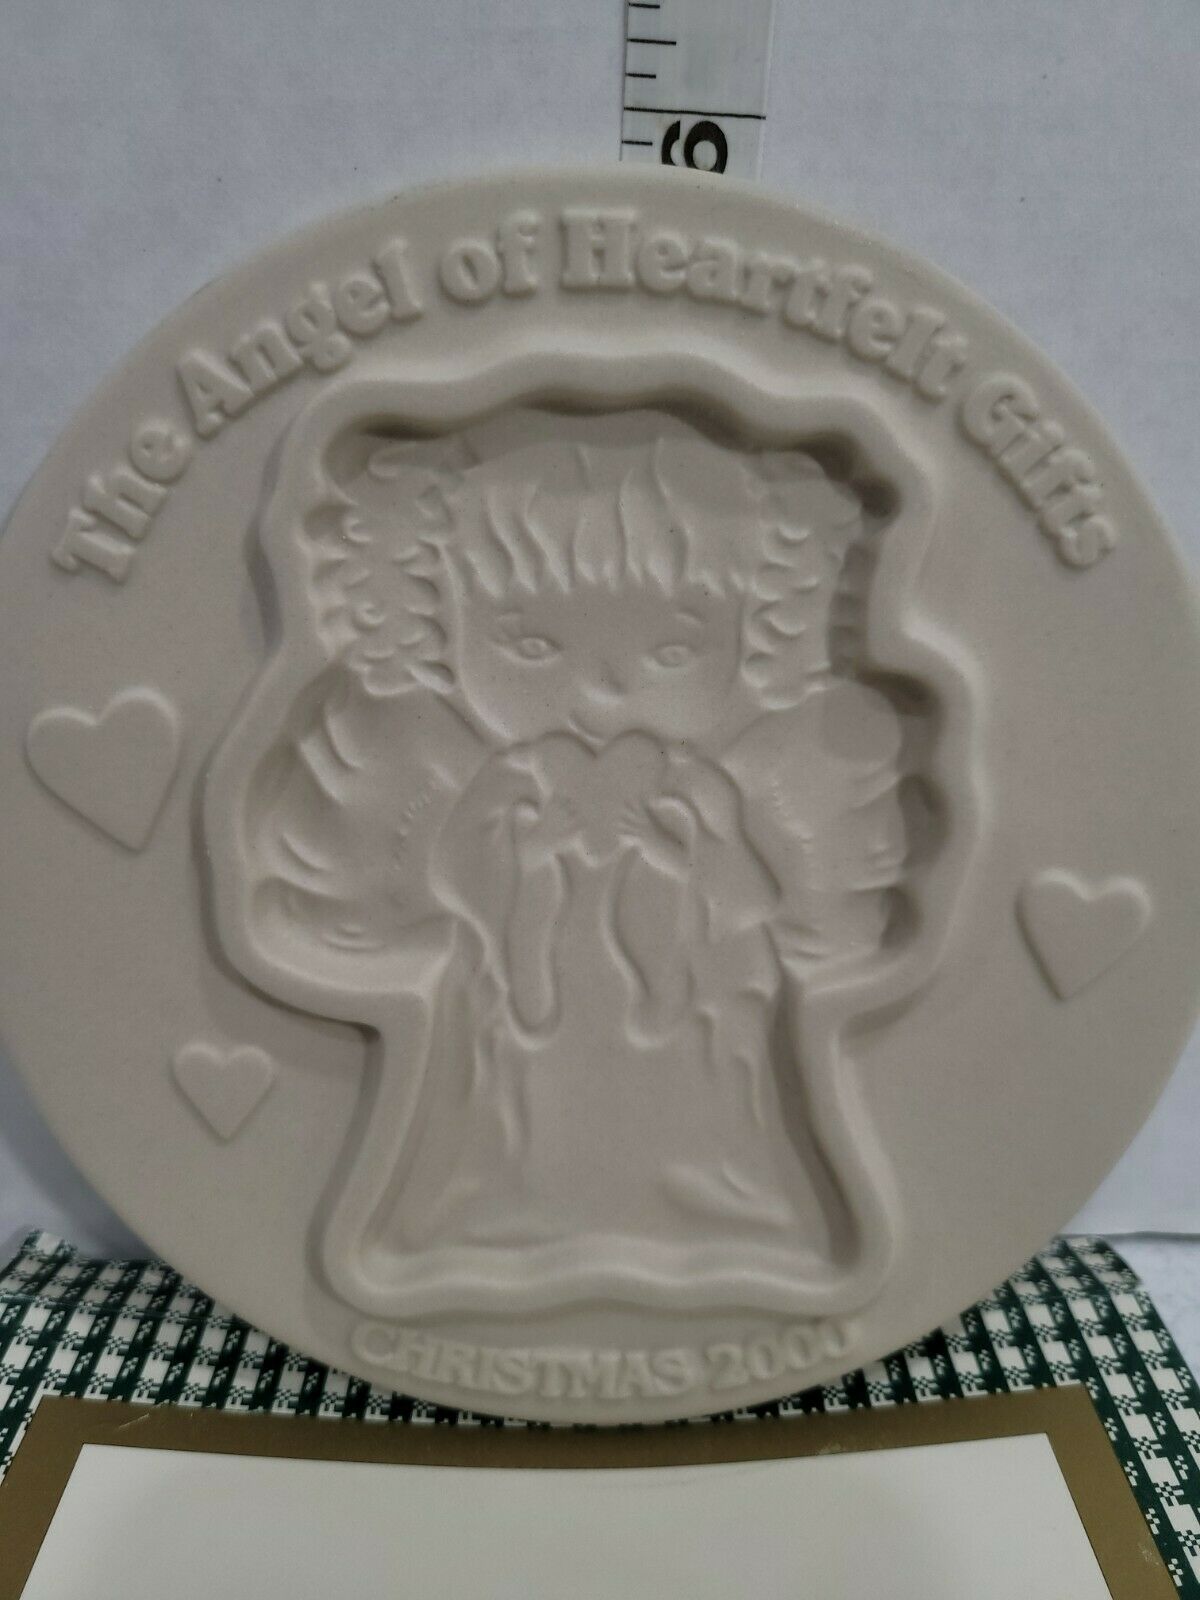 Workshops Of Gerald E Henn The Angel Of Heartfelt Gifts 2000 Cookie Mold Limited